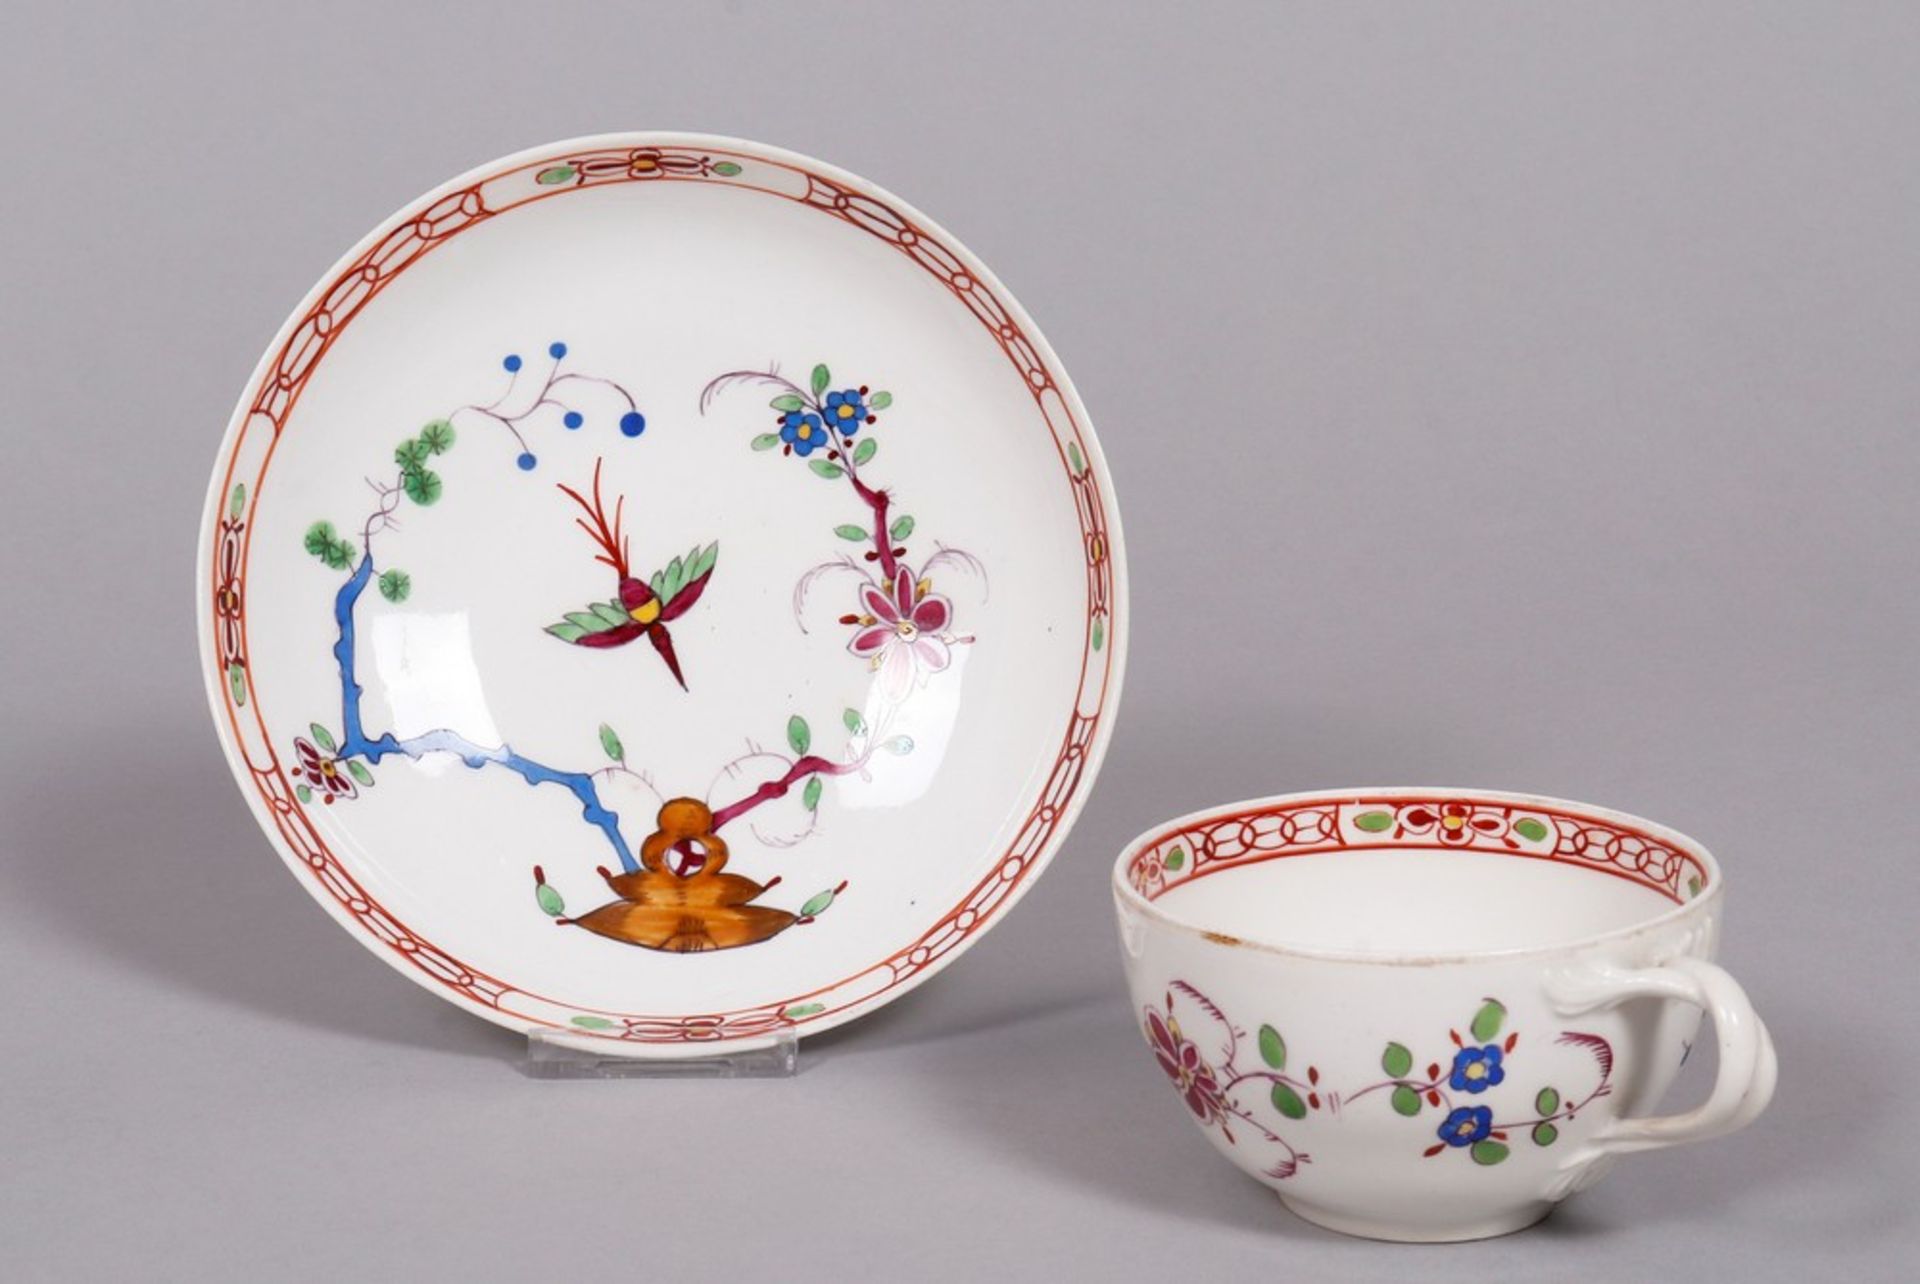 Cup and saucer, Meissen, decor "Fels und Vogel", Marcolini period (c. 1800) - Image 2 of 4